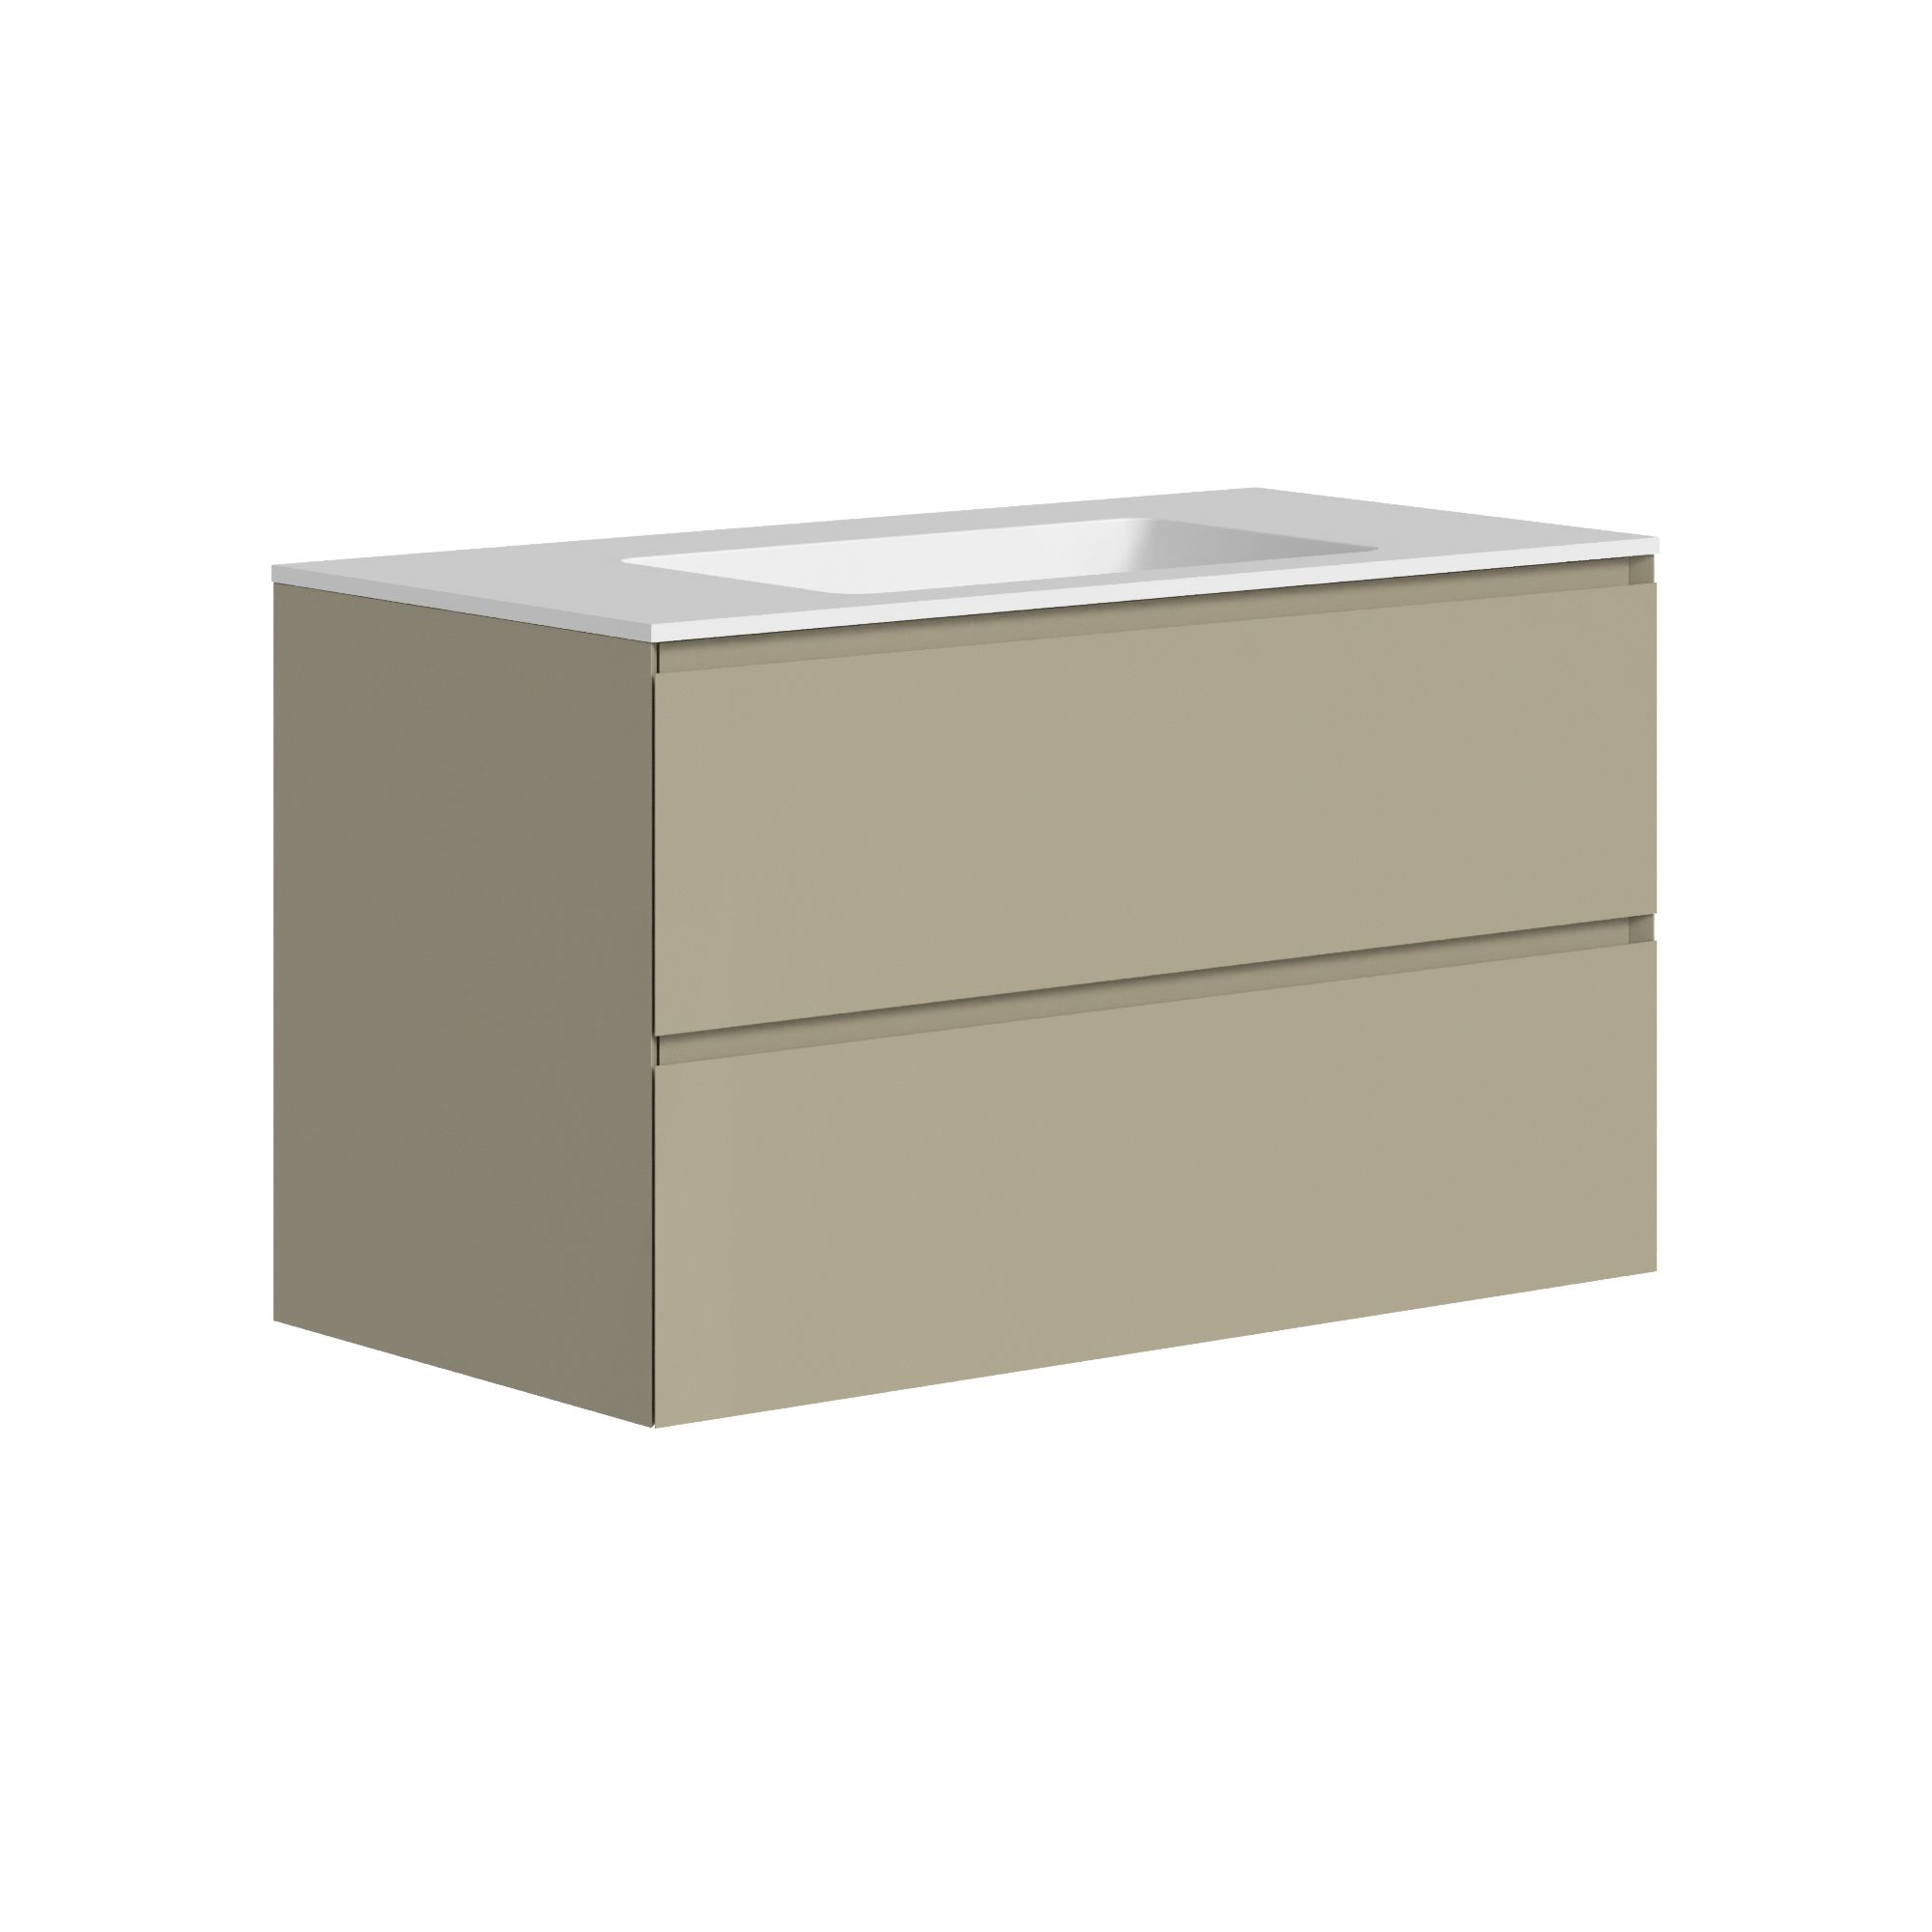 The Ellery Washbasin Pull Open Unit 900x520mm with Integrated Basin